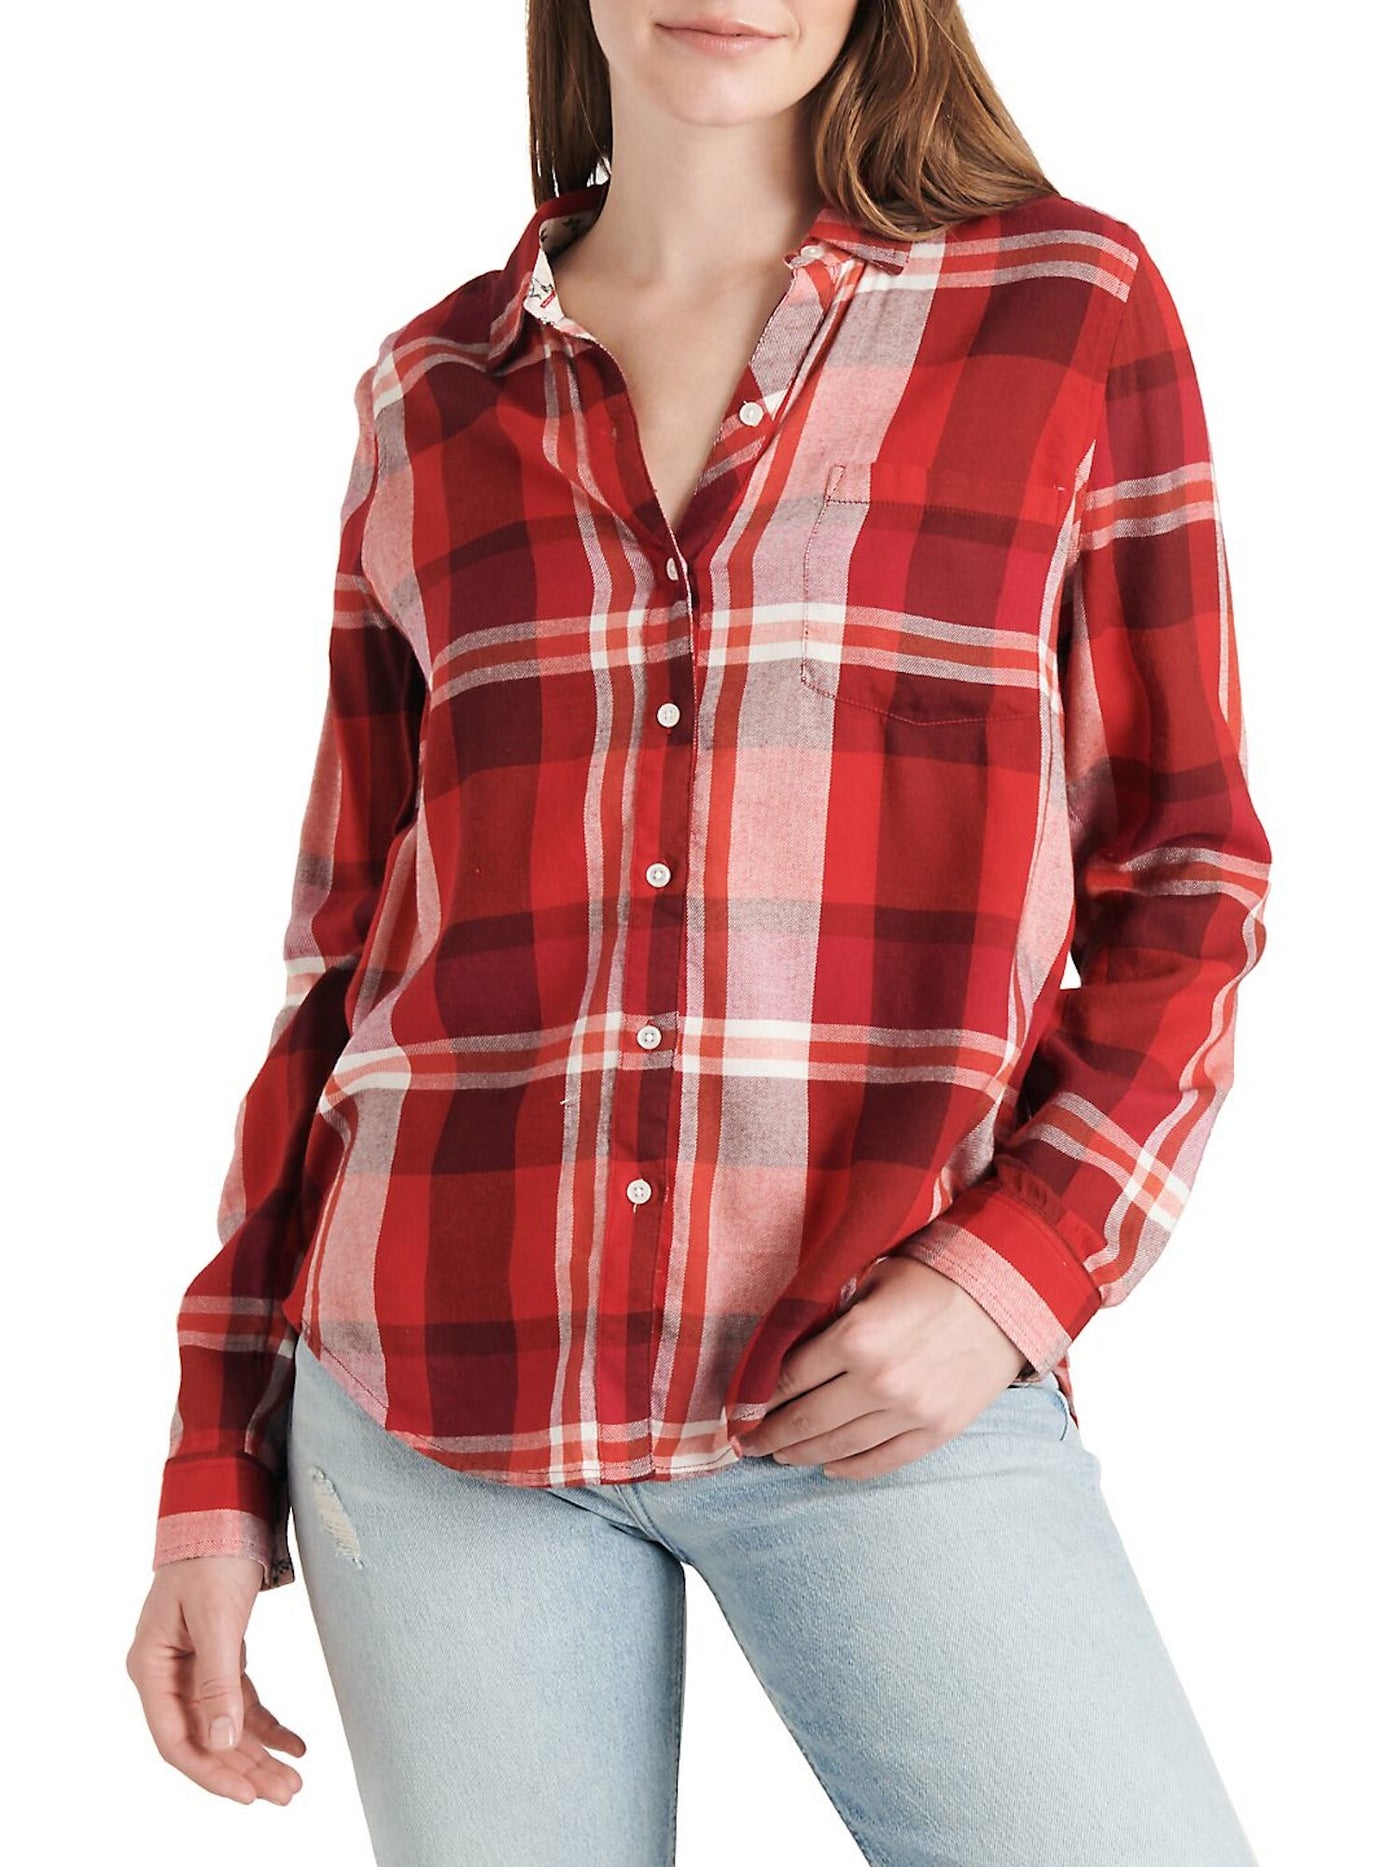 LUCKY BRAND Womens Red Plaid Long Sleeve Button Up Top XL